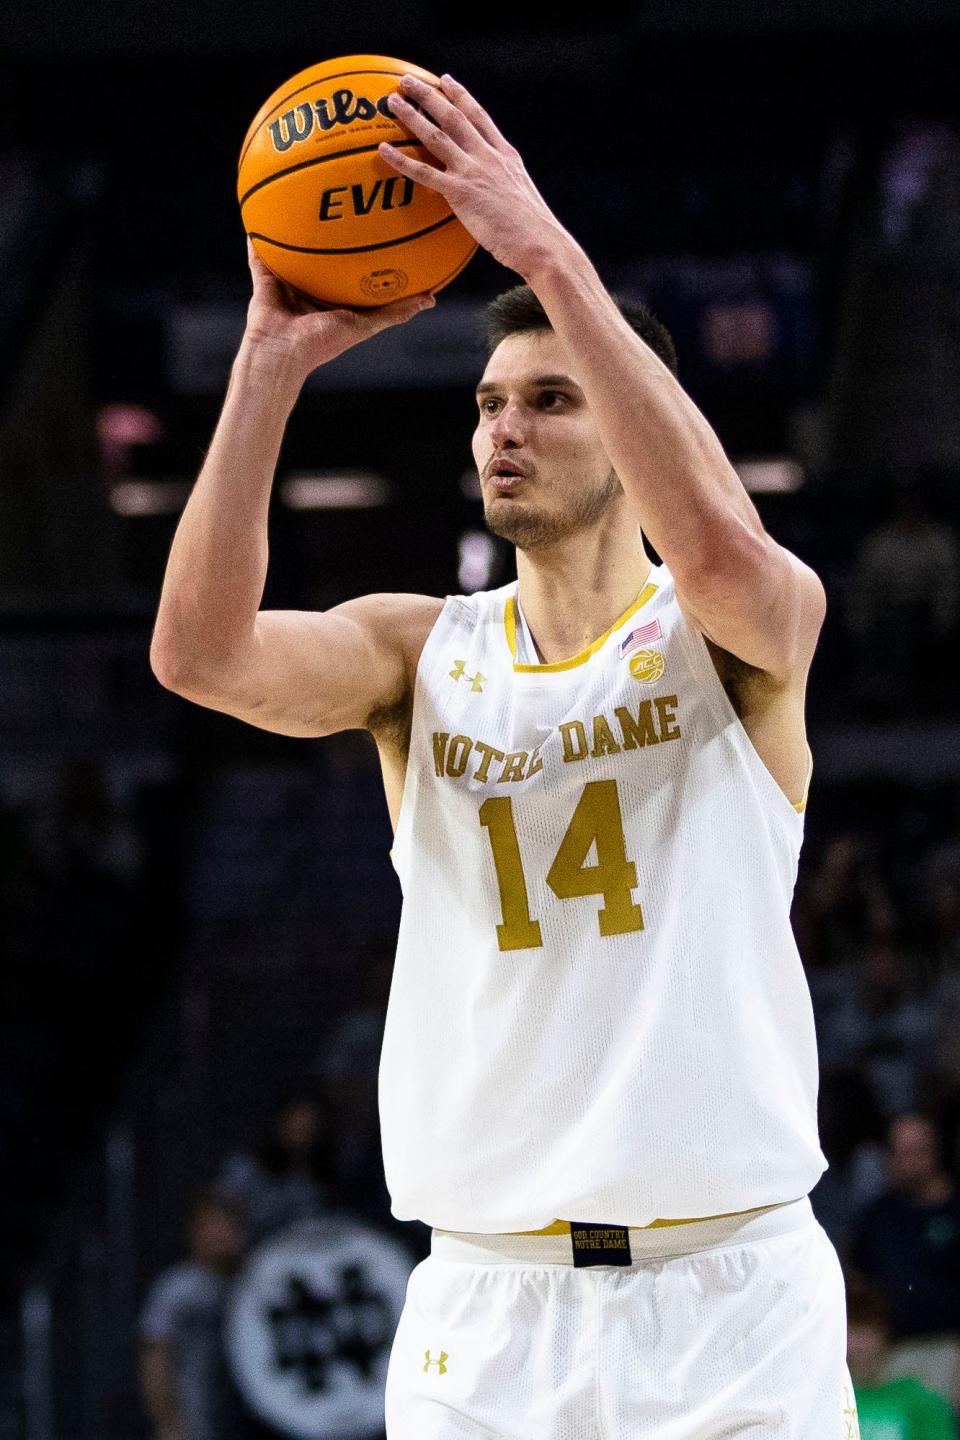 Notre Dame's Nate Laszewski (14) shoots during the second half of an NCAA college basketball game against Virginia Tech, Saturday, Feb. 11, 2023 in South Bend, Ind. (AP Photo/Michael Caterina)